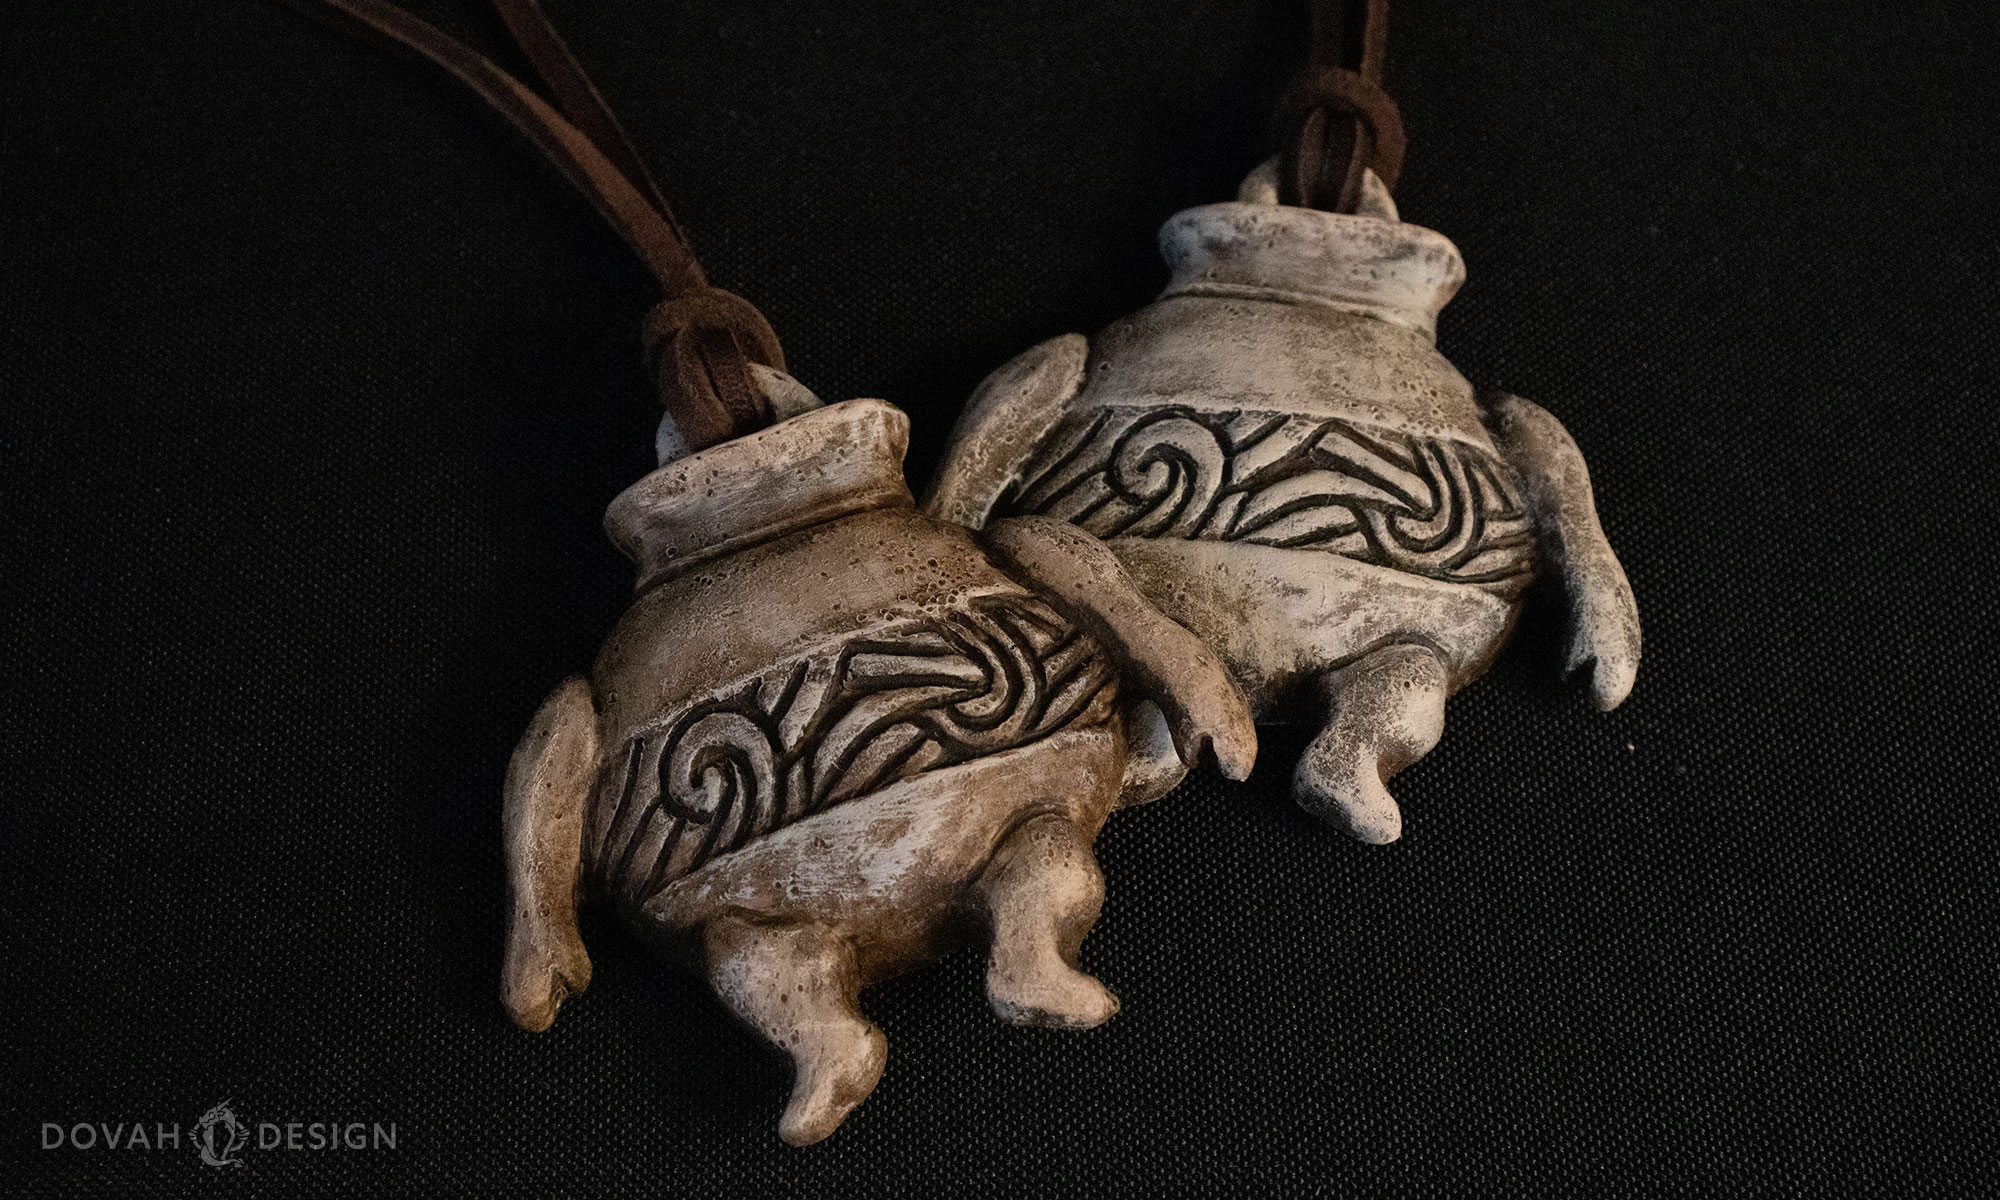 Detail view of two companion jar talismans, sitting on a black tablecloth.